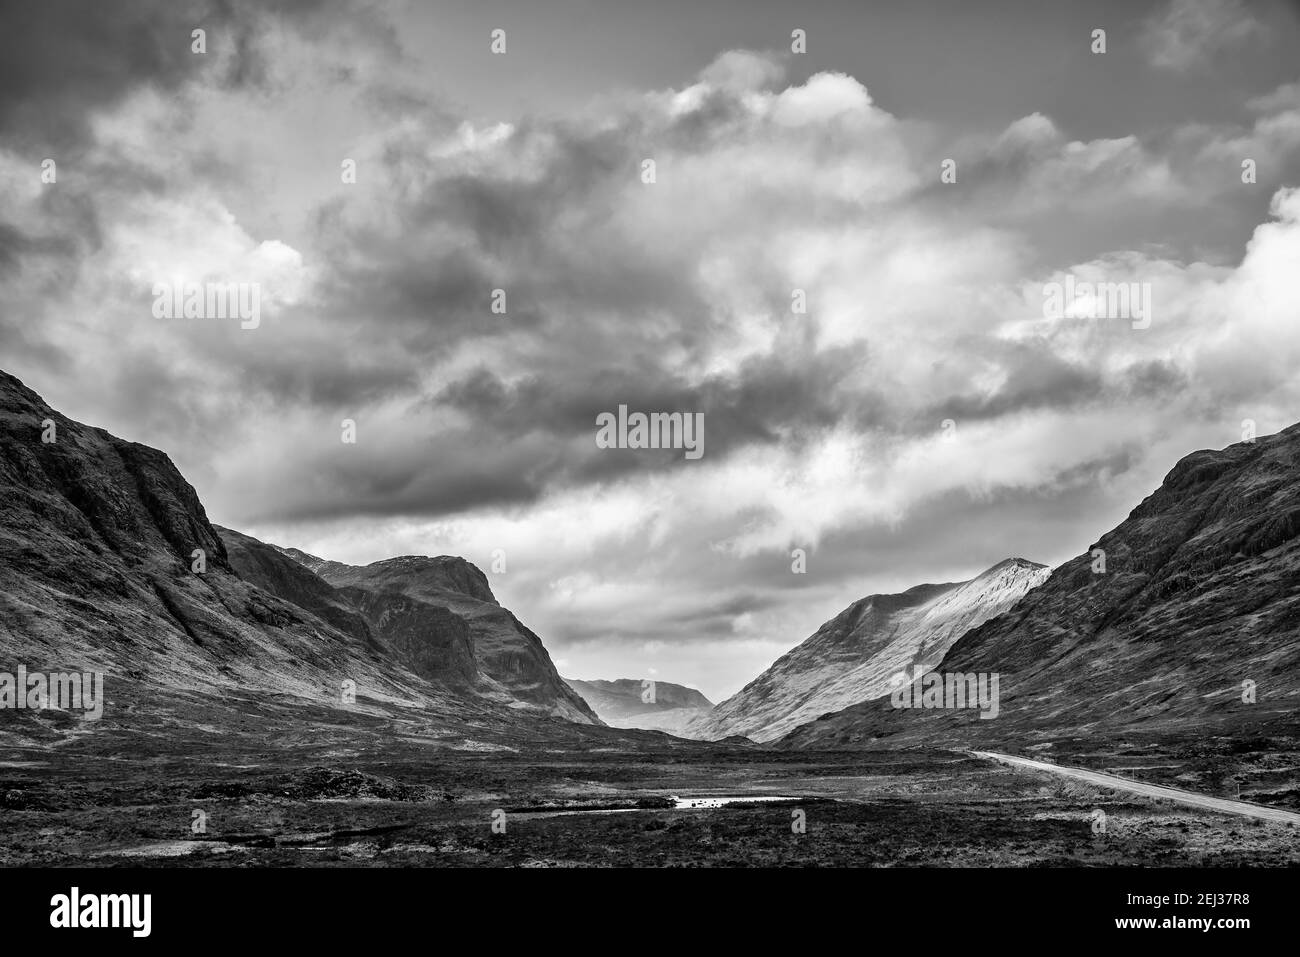 Stunning  black and white landscape image view down Glencoe Valley in Scottish Highlands with mountain ranges in dramatic Winter lighting Stock Photo